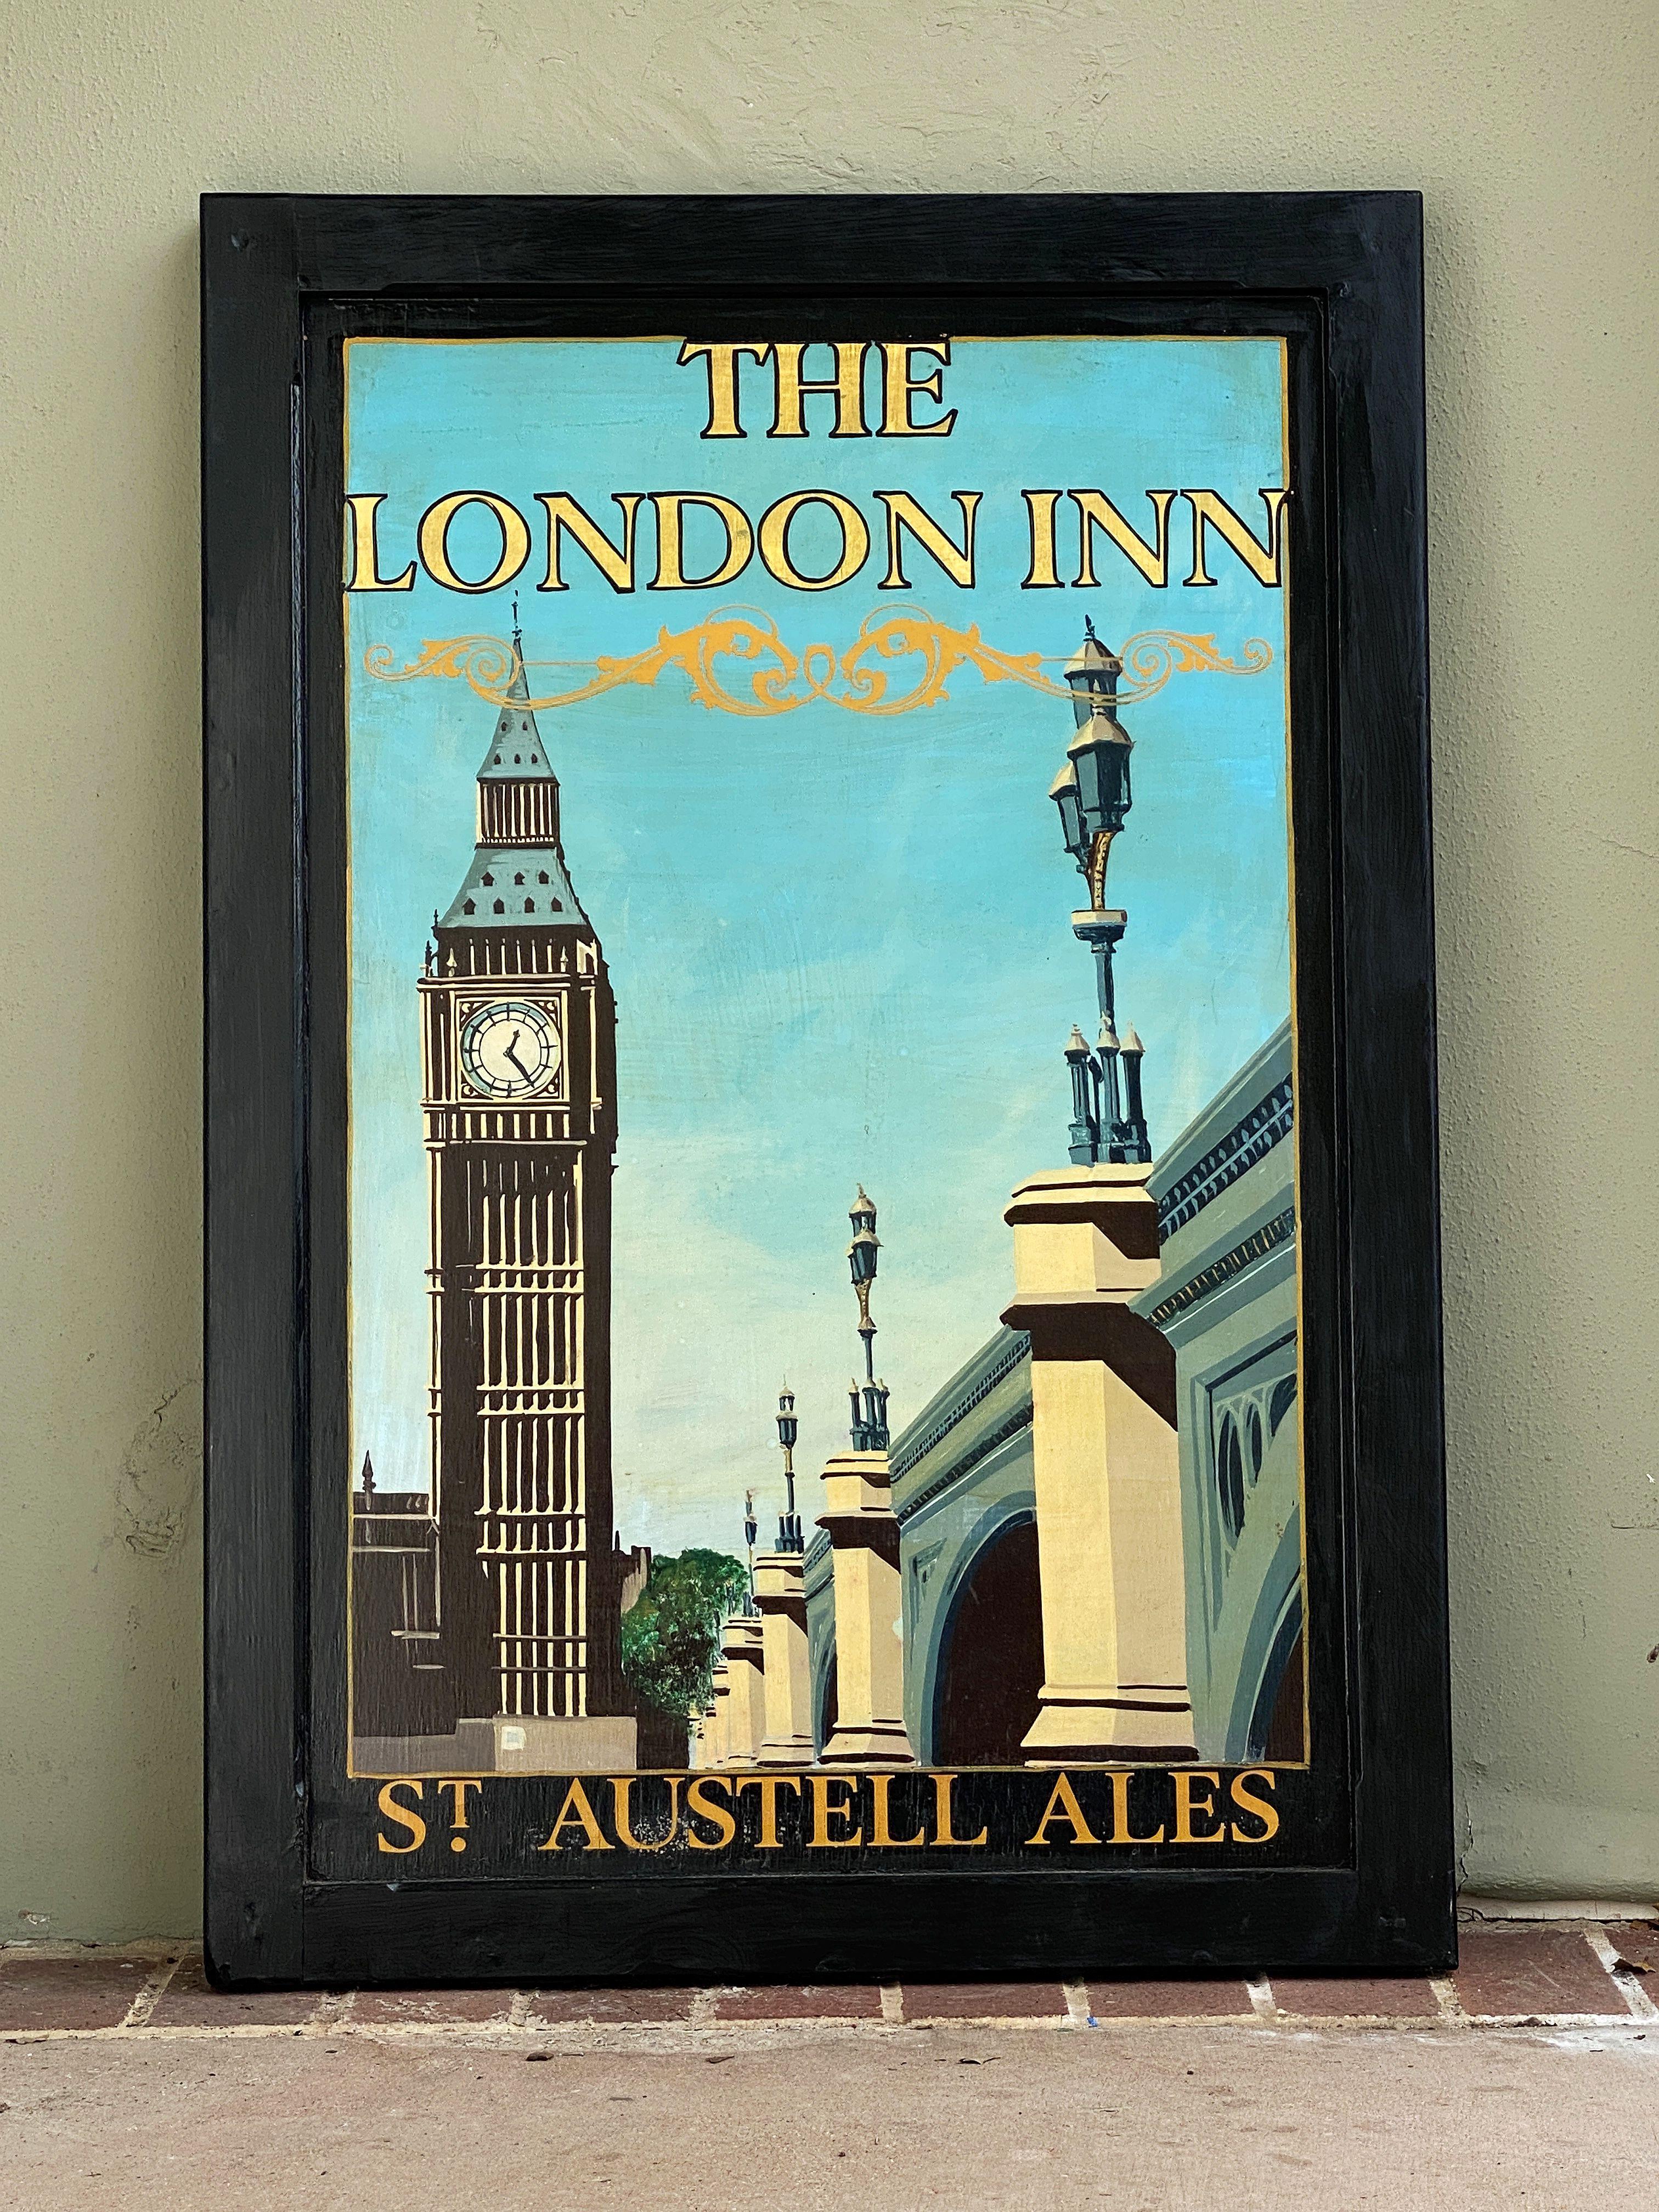 An authentic English pub sign (two-sided) featuring a painting of a City of London scene featuring Big Ben clock tower and Westminster Bridge, entitled: The London Inn - St. Austell Ales.

St Austell Brewery is a brewery founded in 1851 by Walter